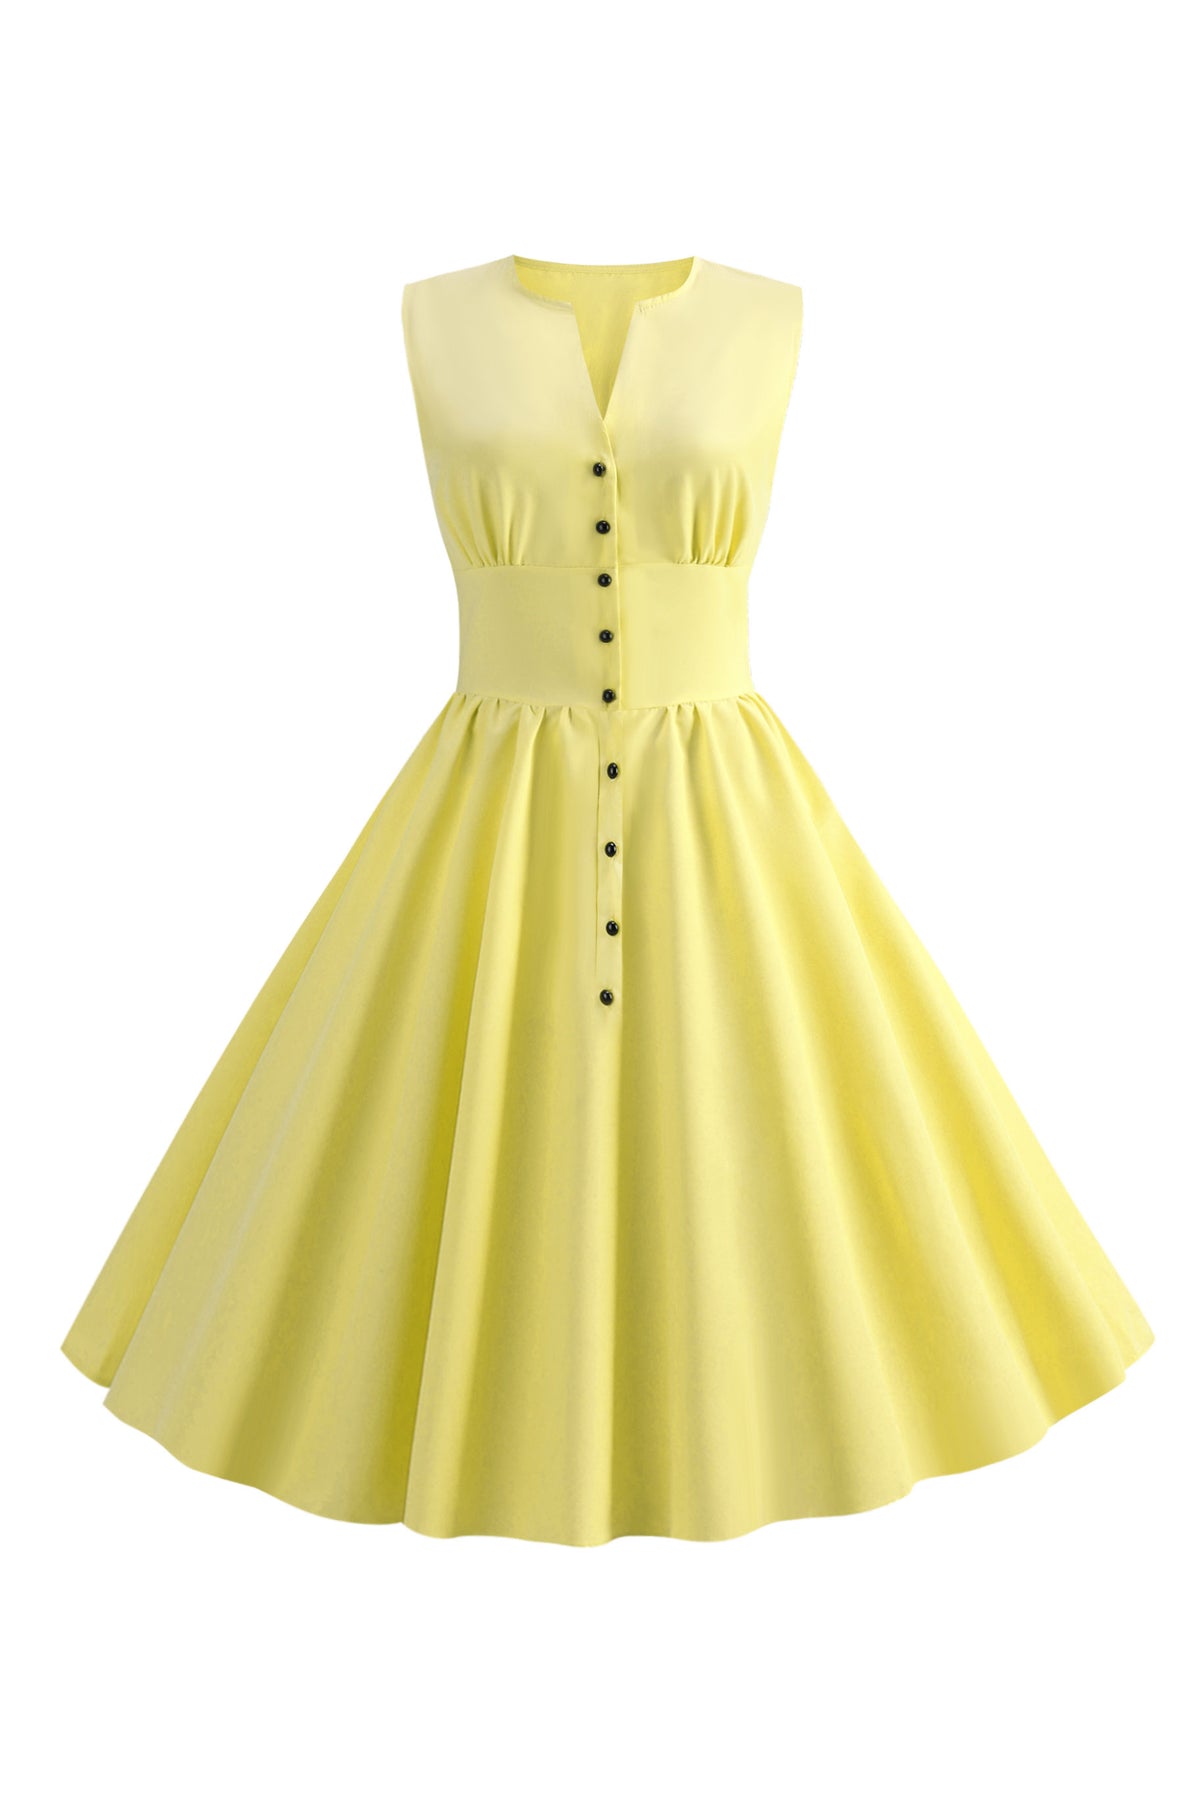 Simple Button Embellished Yellow Cocktail Dress